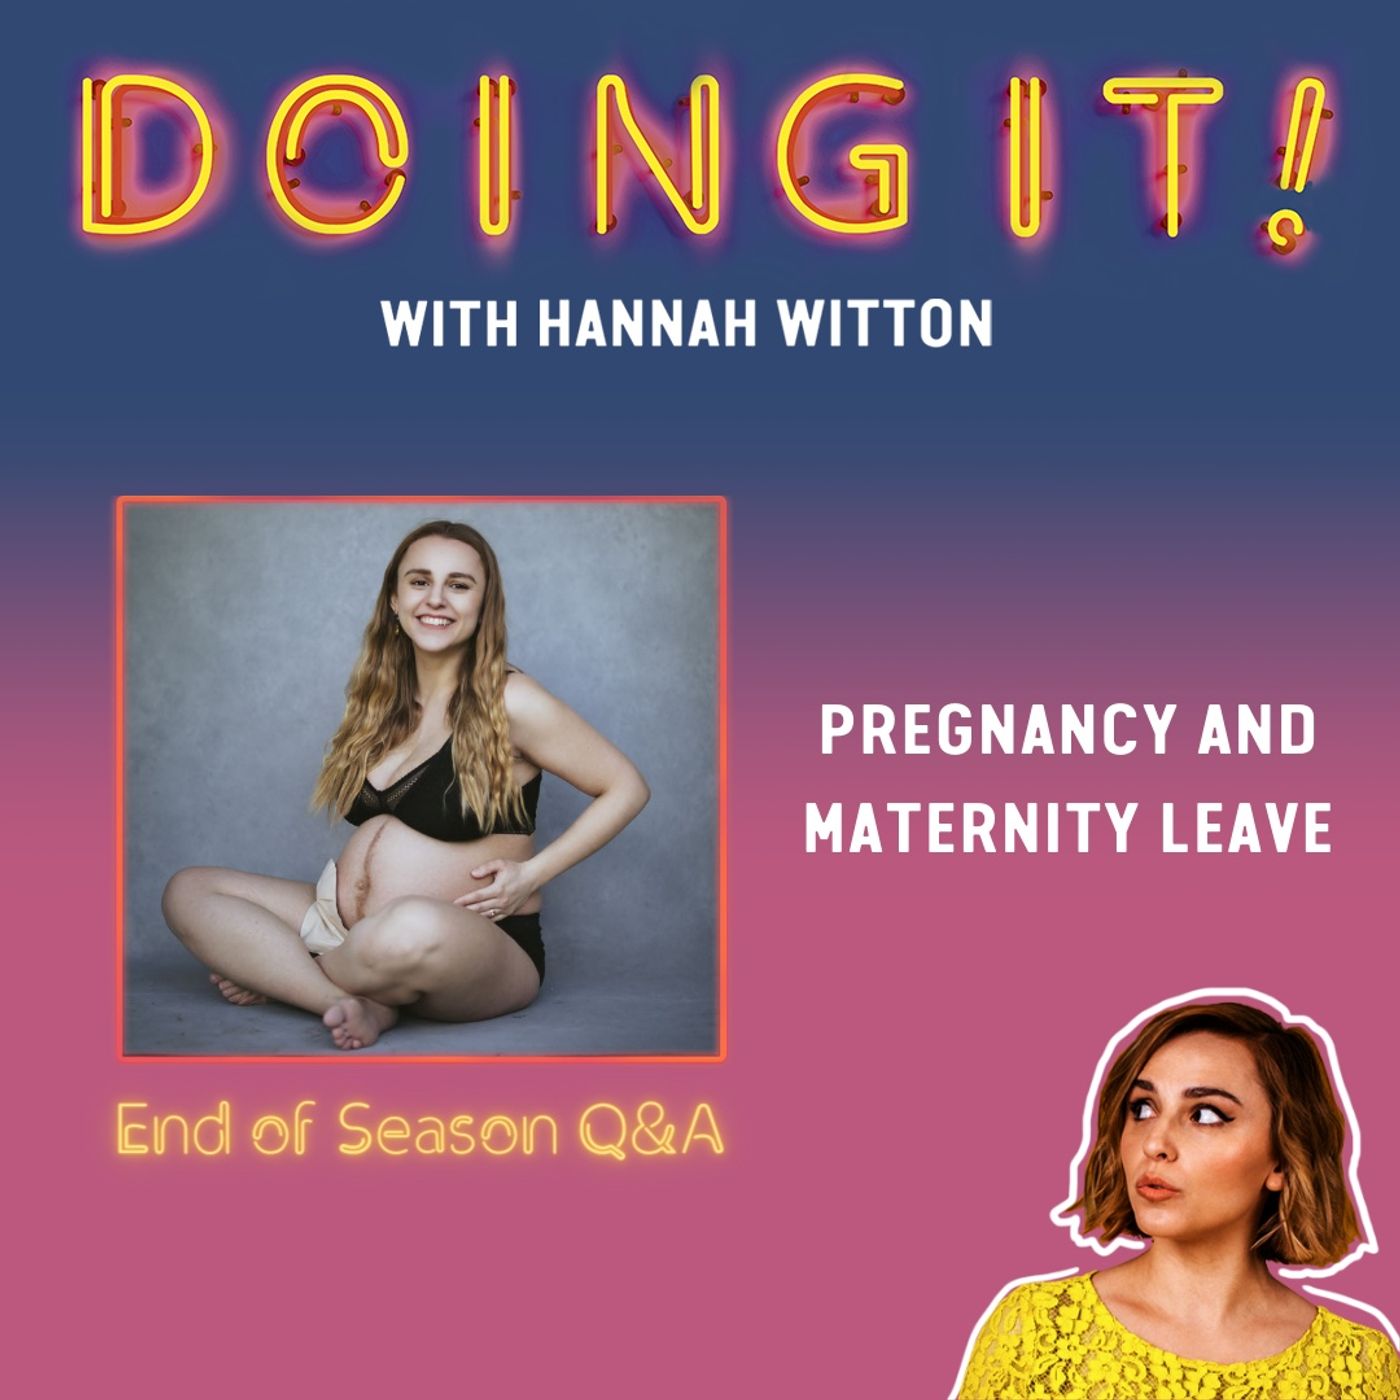 Pregnancy and Maternity Leave (End of Season Q&A!)